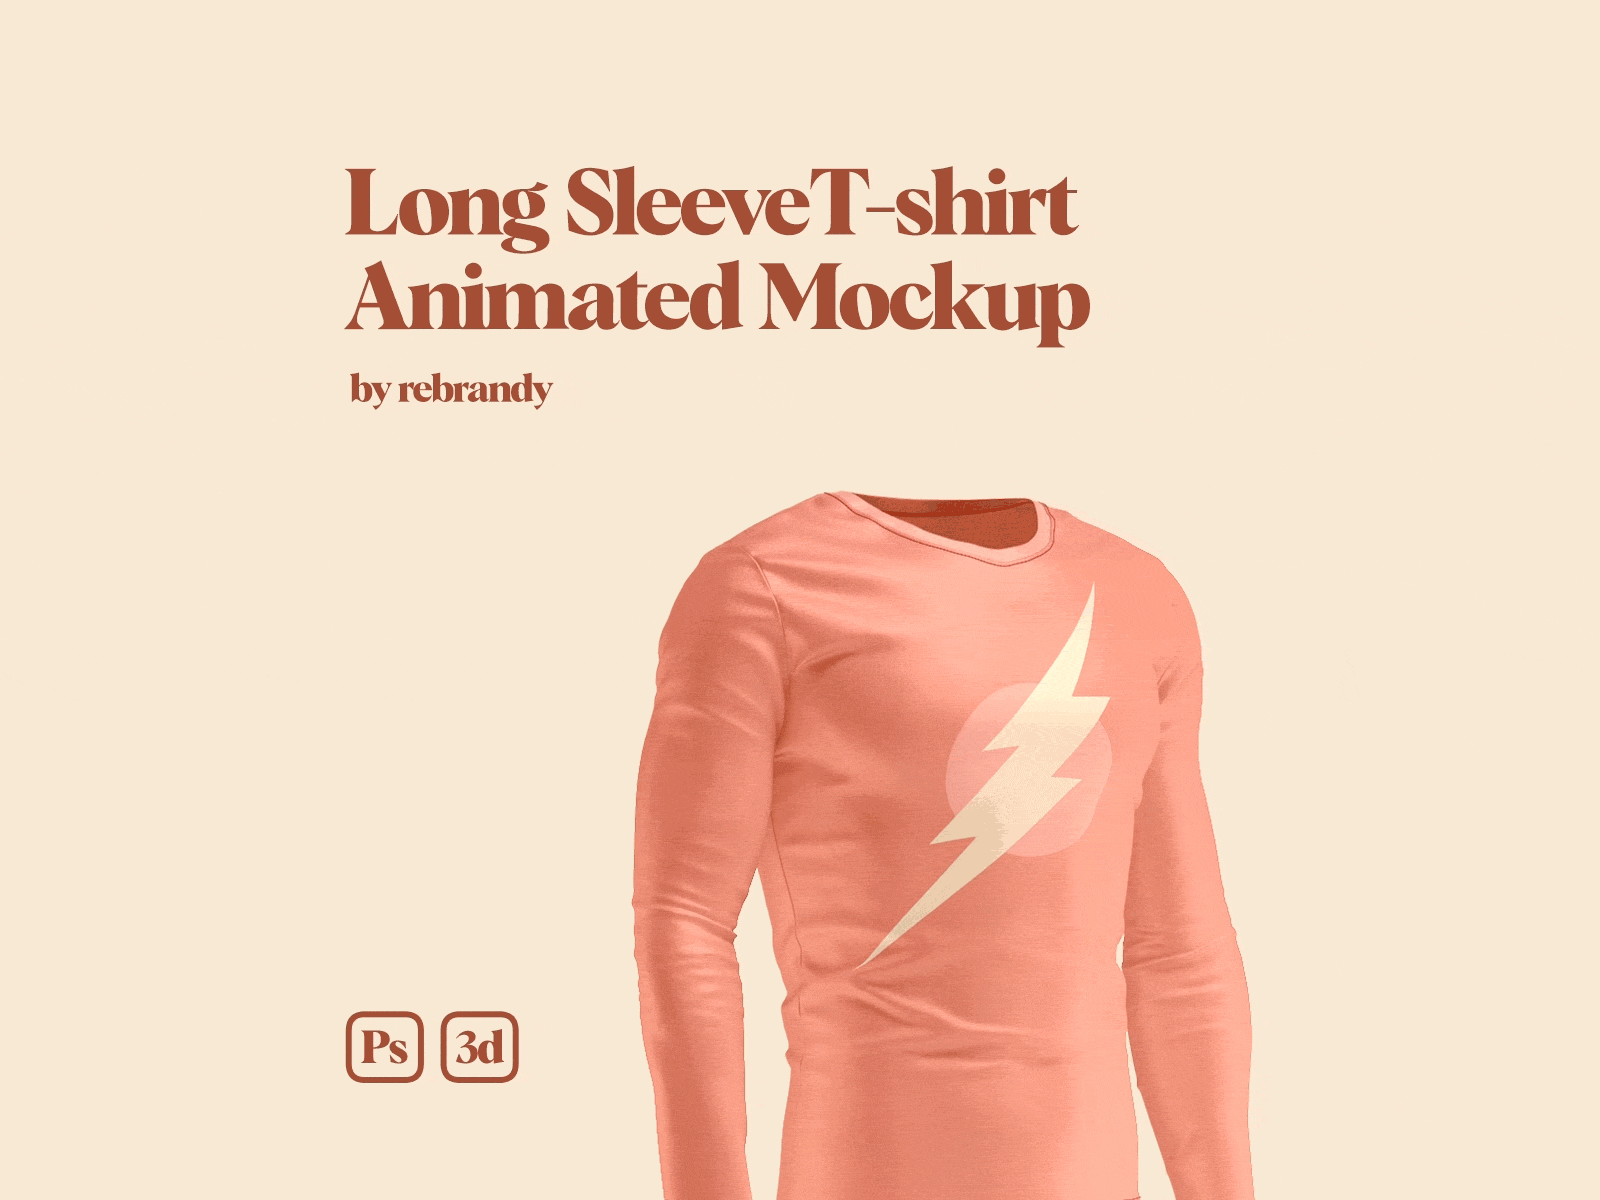 Long Sleeve T-shirt Animated Mockup animated cloth clothing cotton download fabric jersey longsleeve men mockup psd shirt sleeve slim sport sweater sweatshirt t shirt tee shirt tshirt